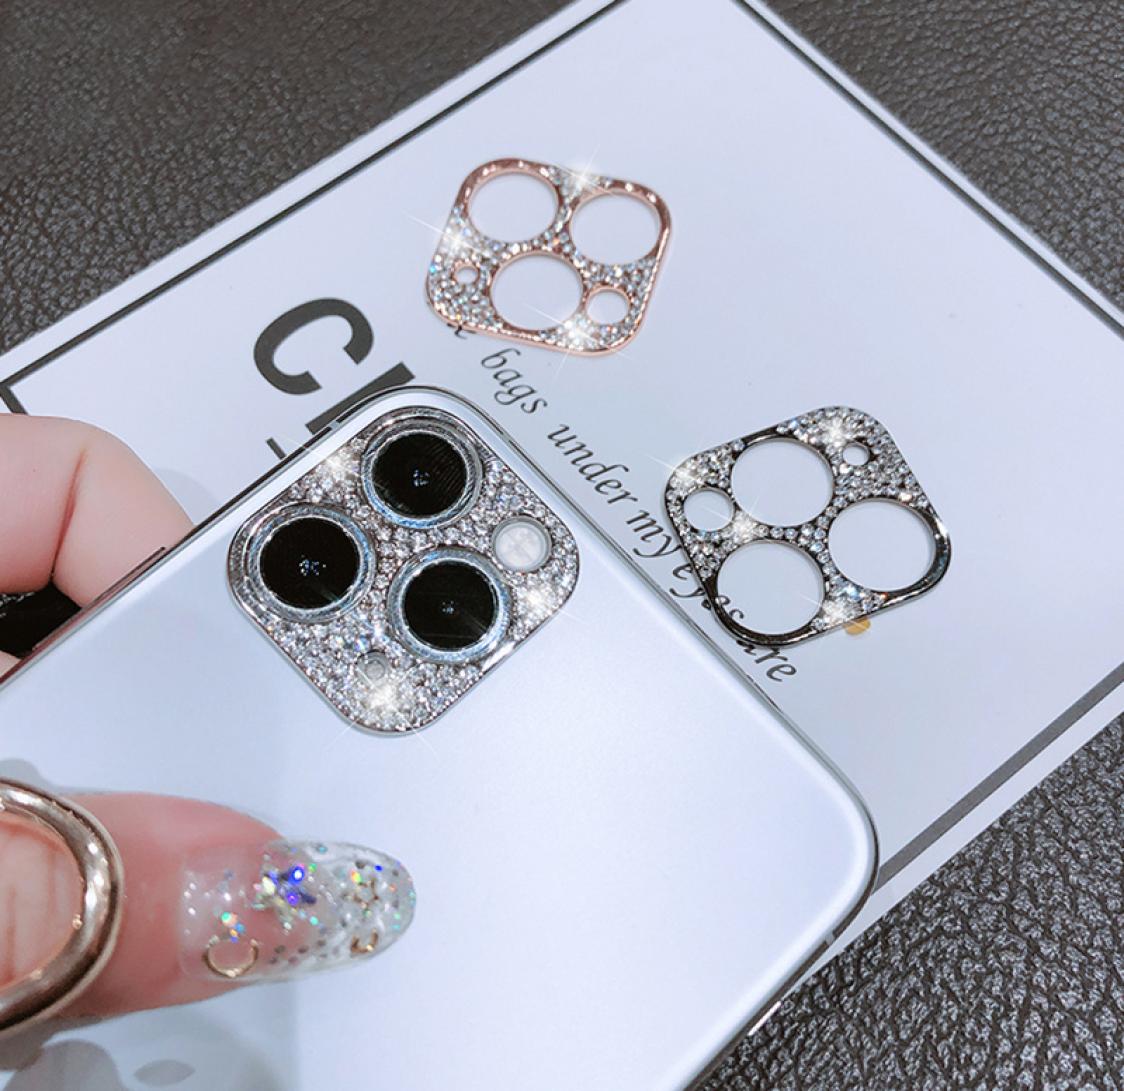 Bling Diamond Camera Lens Protector For iPhone 12 Pro Max Glitter Rhinestone Camera Protective Ring For iPhone 11 Pro Max Cover6512611